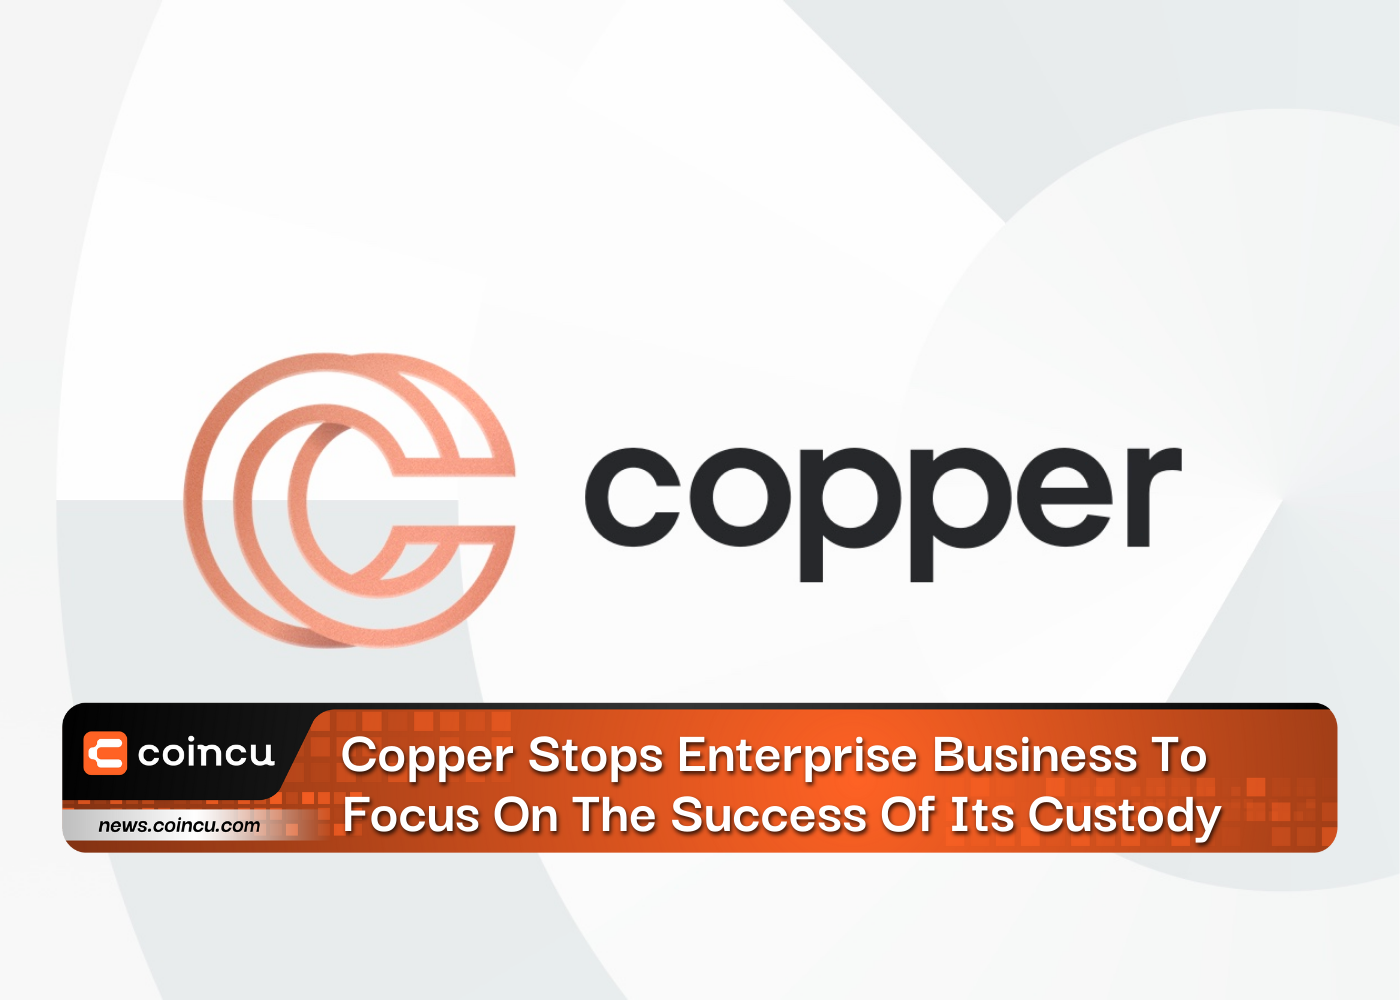 Copper Stops Enterprise Business To Focus On The Success Of Its Custody